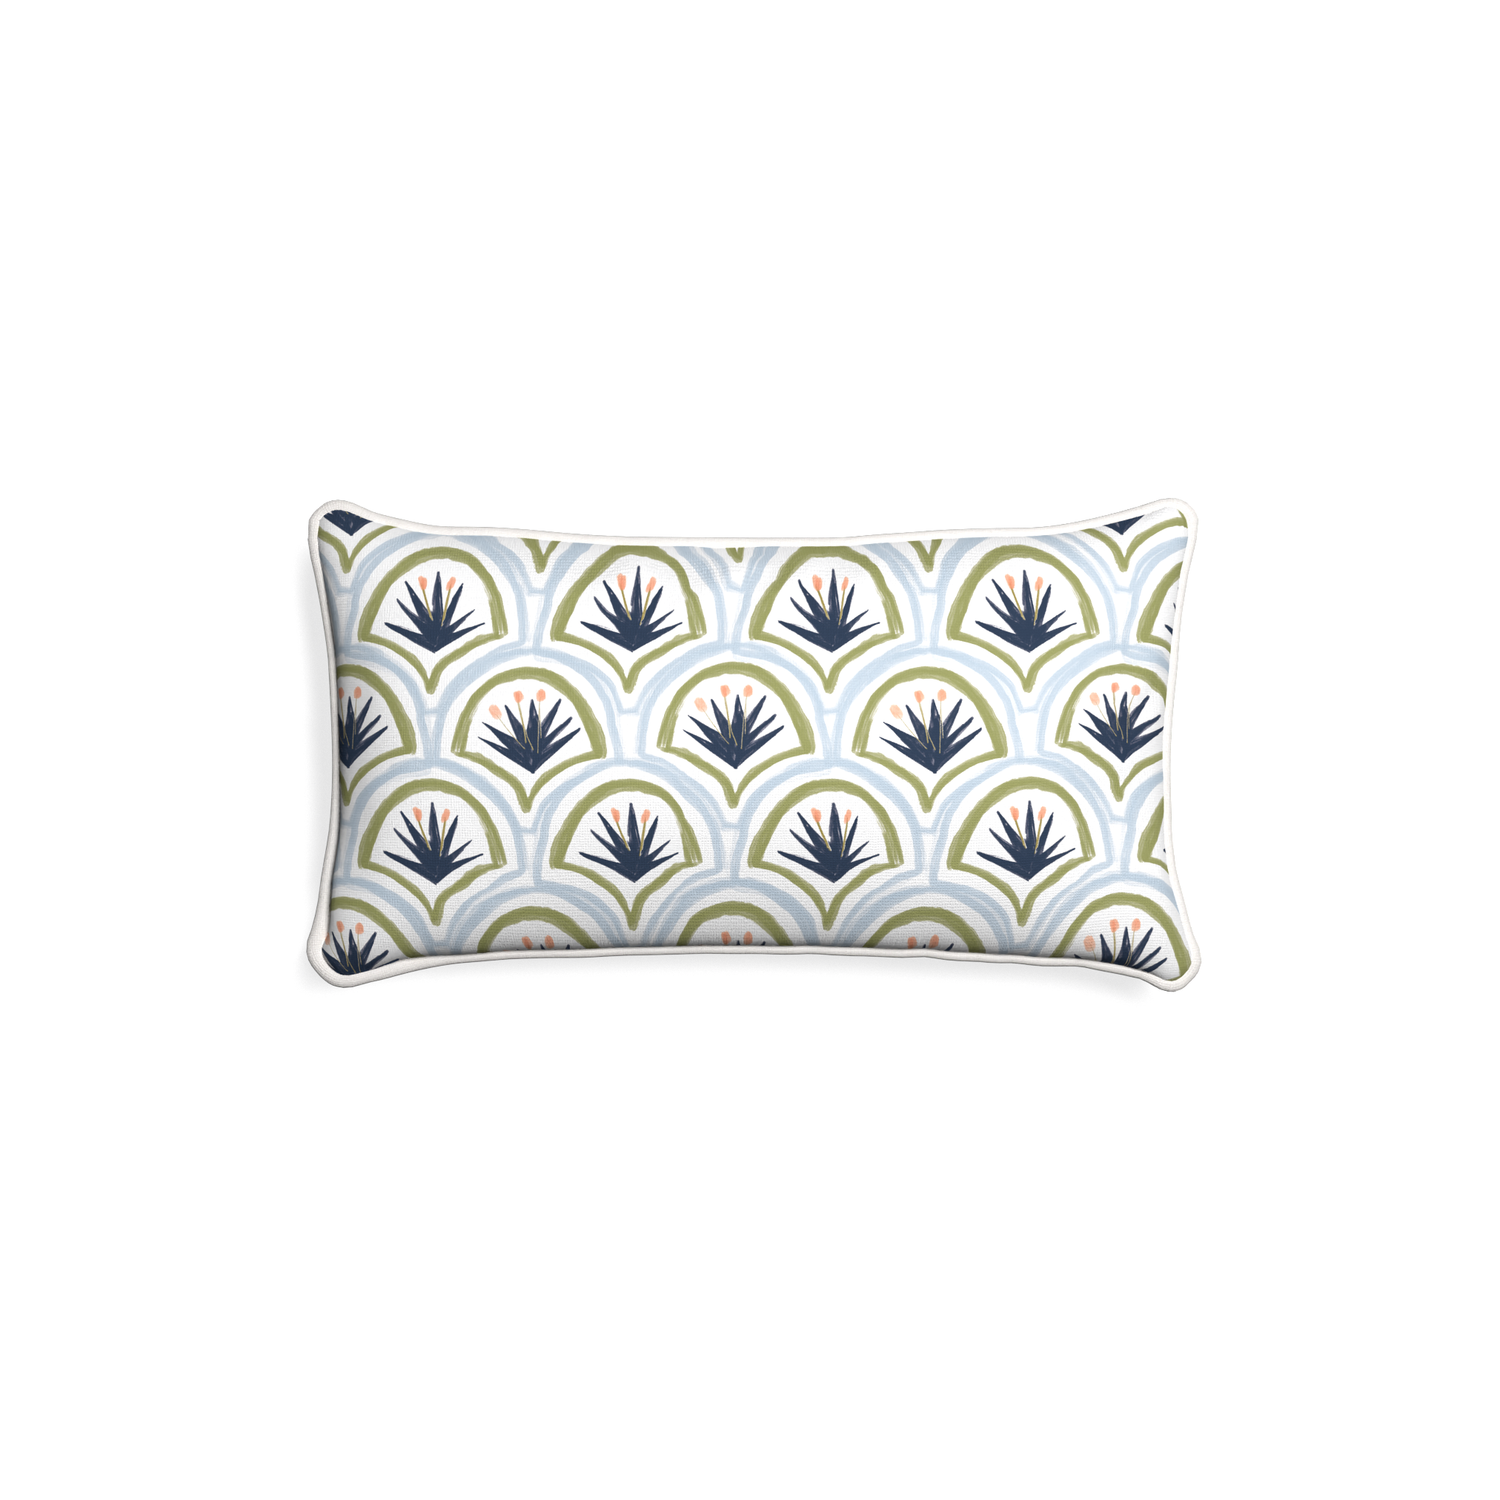 Petite-lumbar thatcher midnight custom art deco palm patternpillow with snow piping on white background